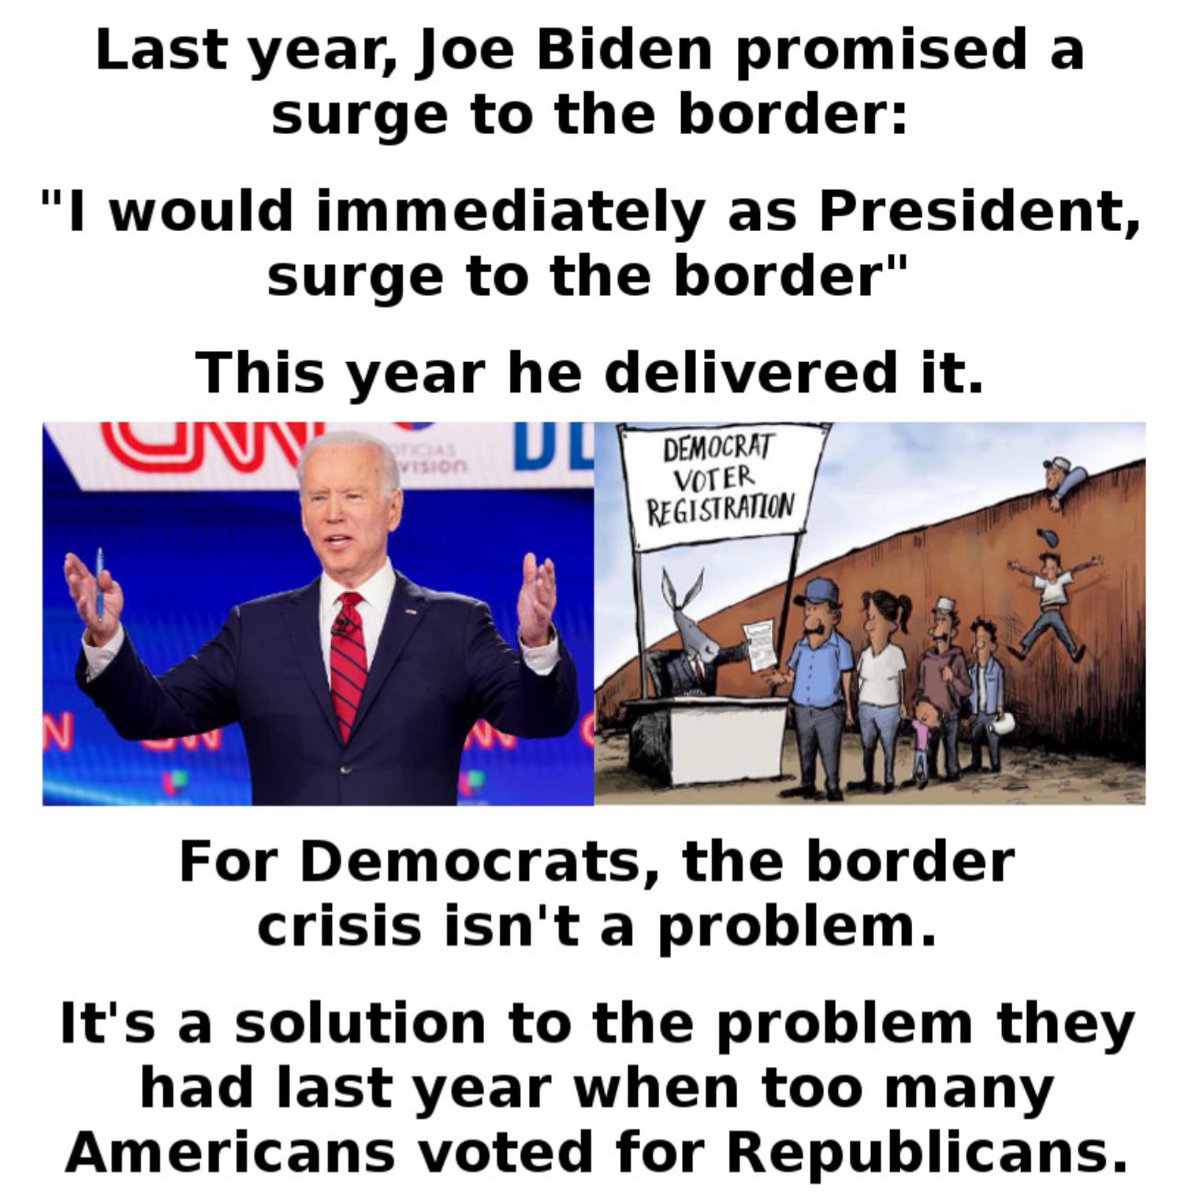 They didn’t come because of Conservatives! @JoeBiden, you sack of sh*t!